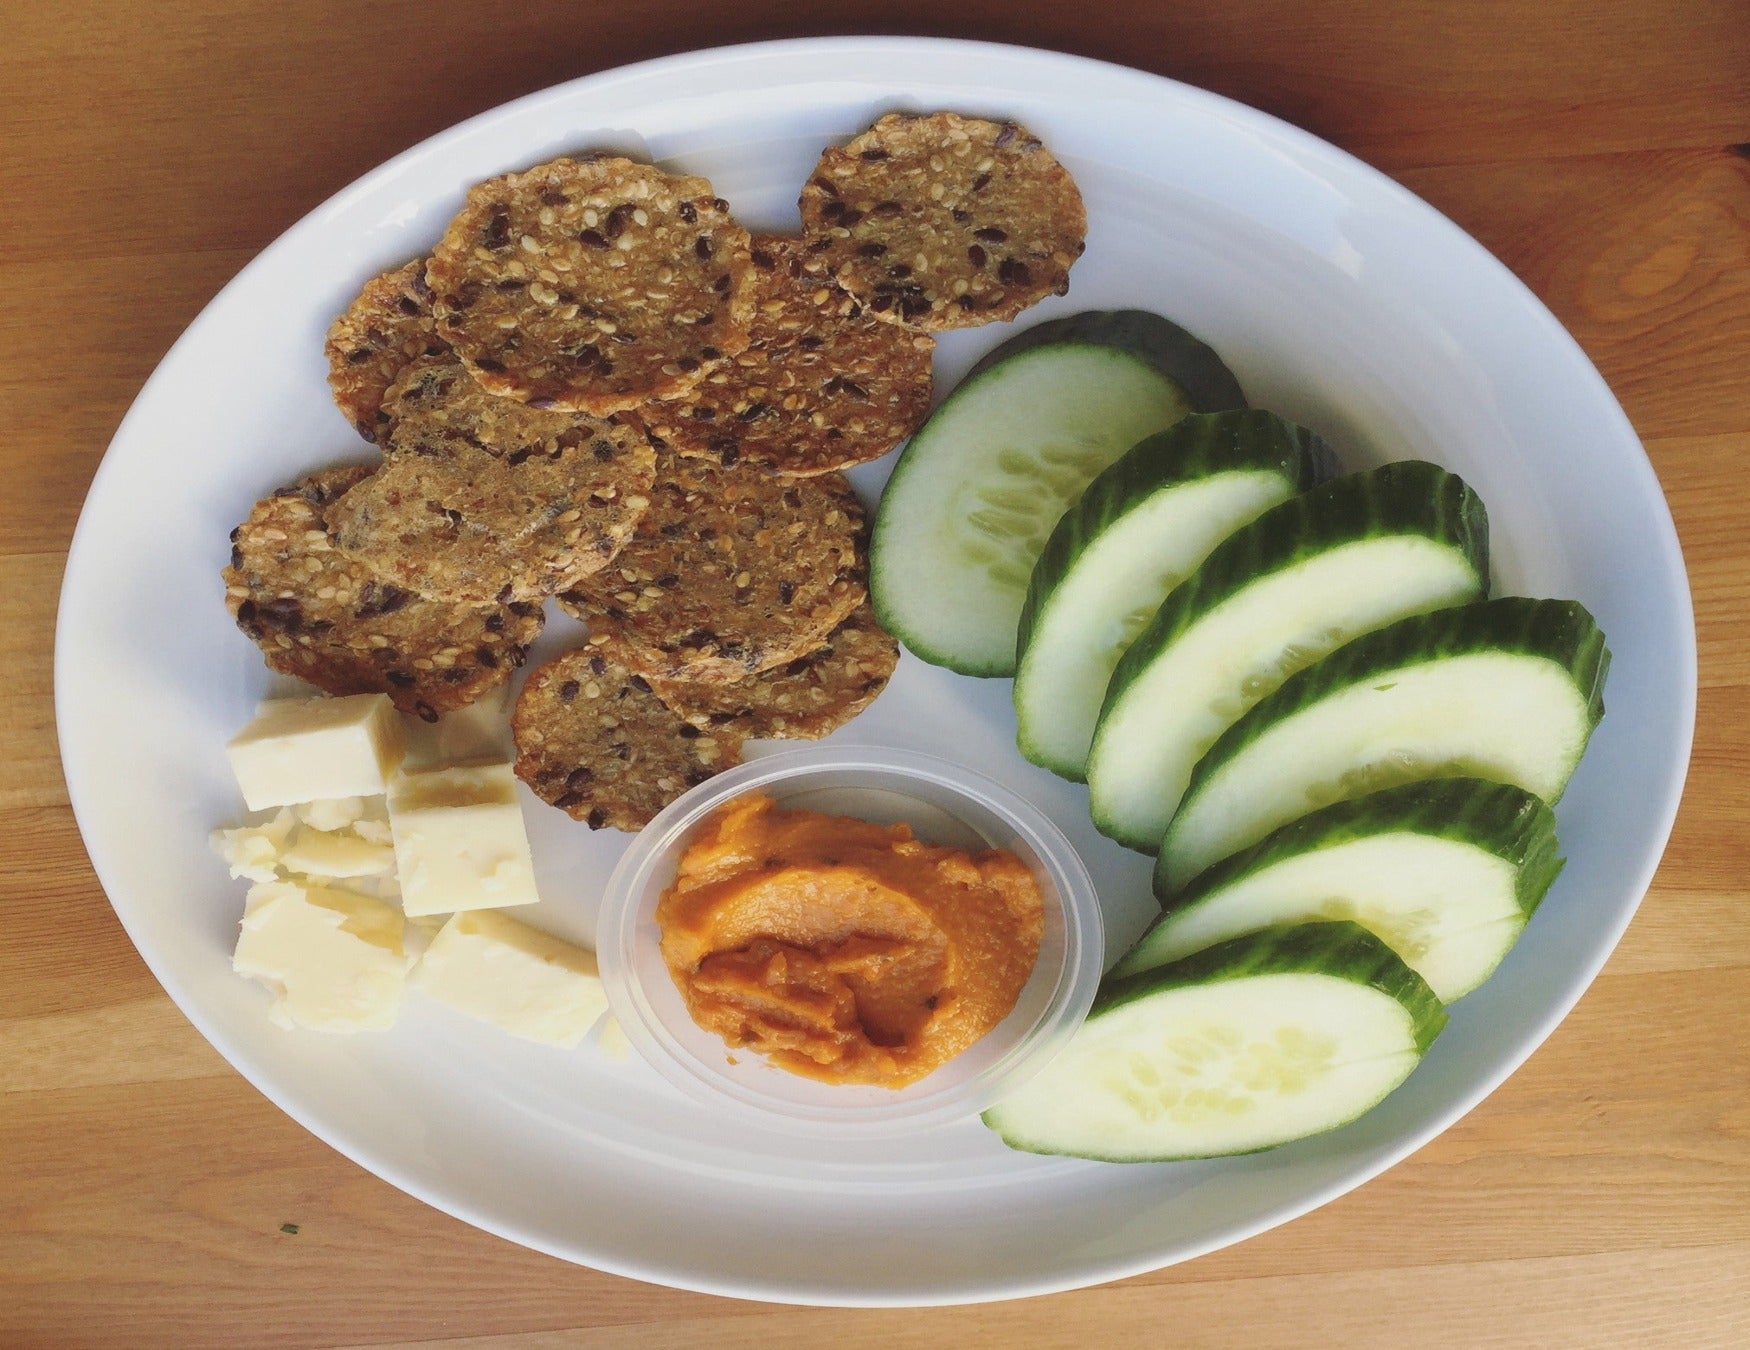 Snack Box - GF crackers, Almond Butter, Celery & White Cheddar